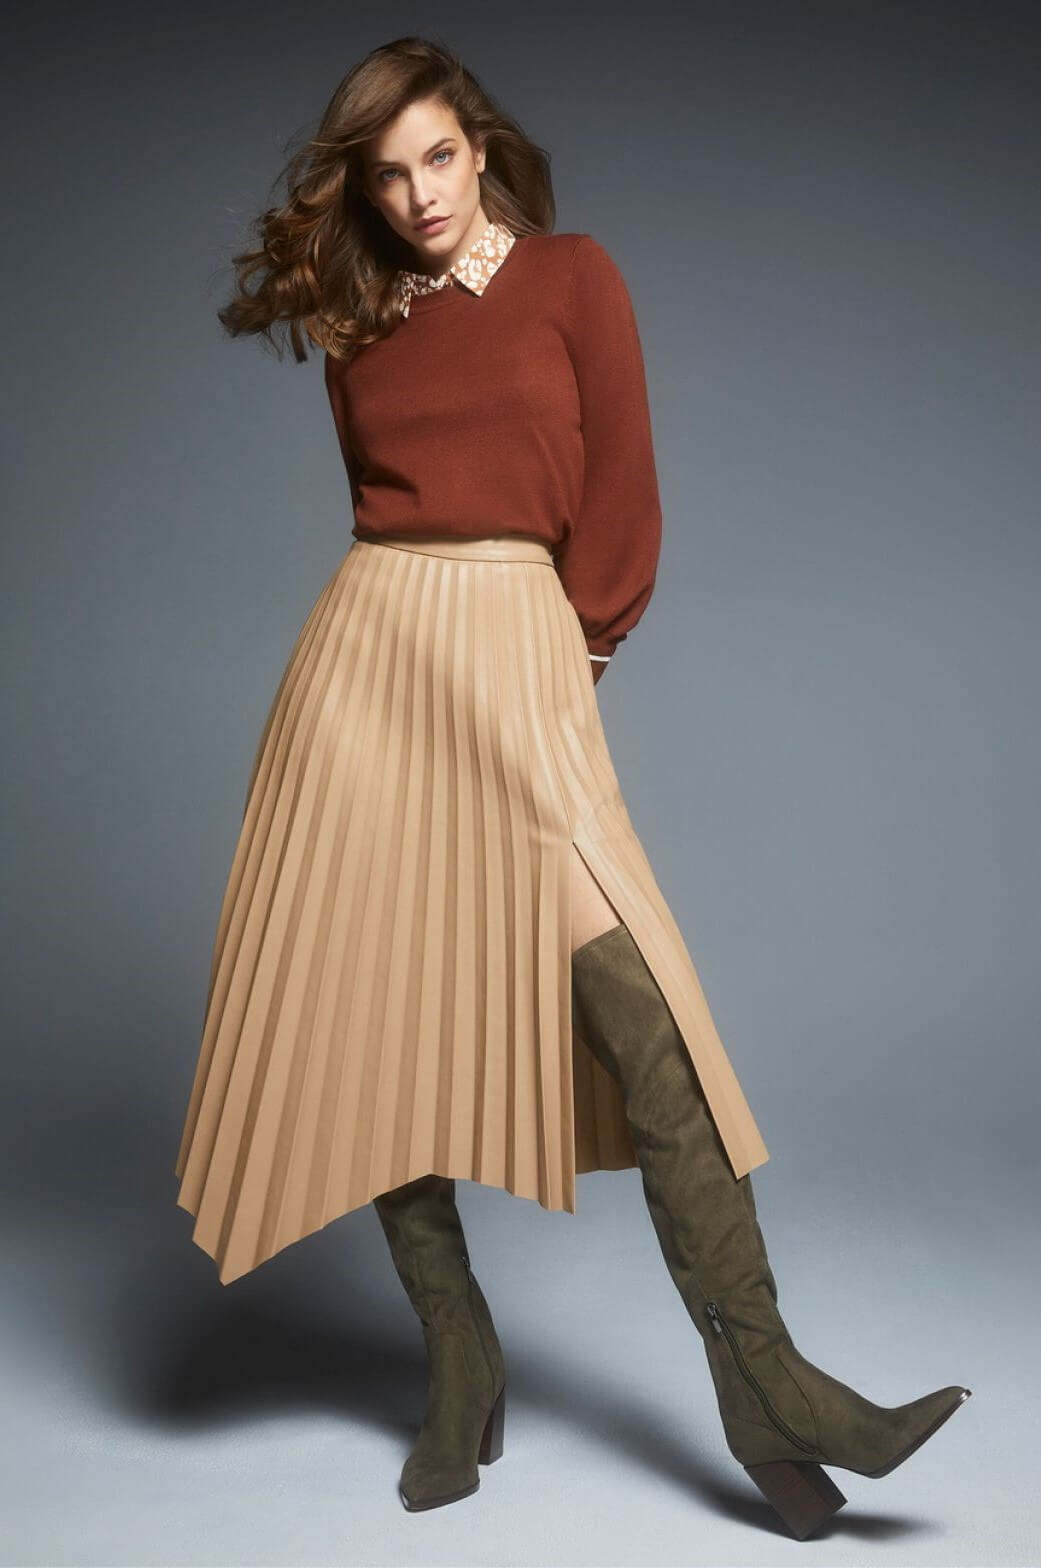 Barbara Palvin In Brown Collar Full Sleeves Top With Pleated Skirt Outfit